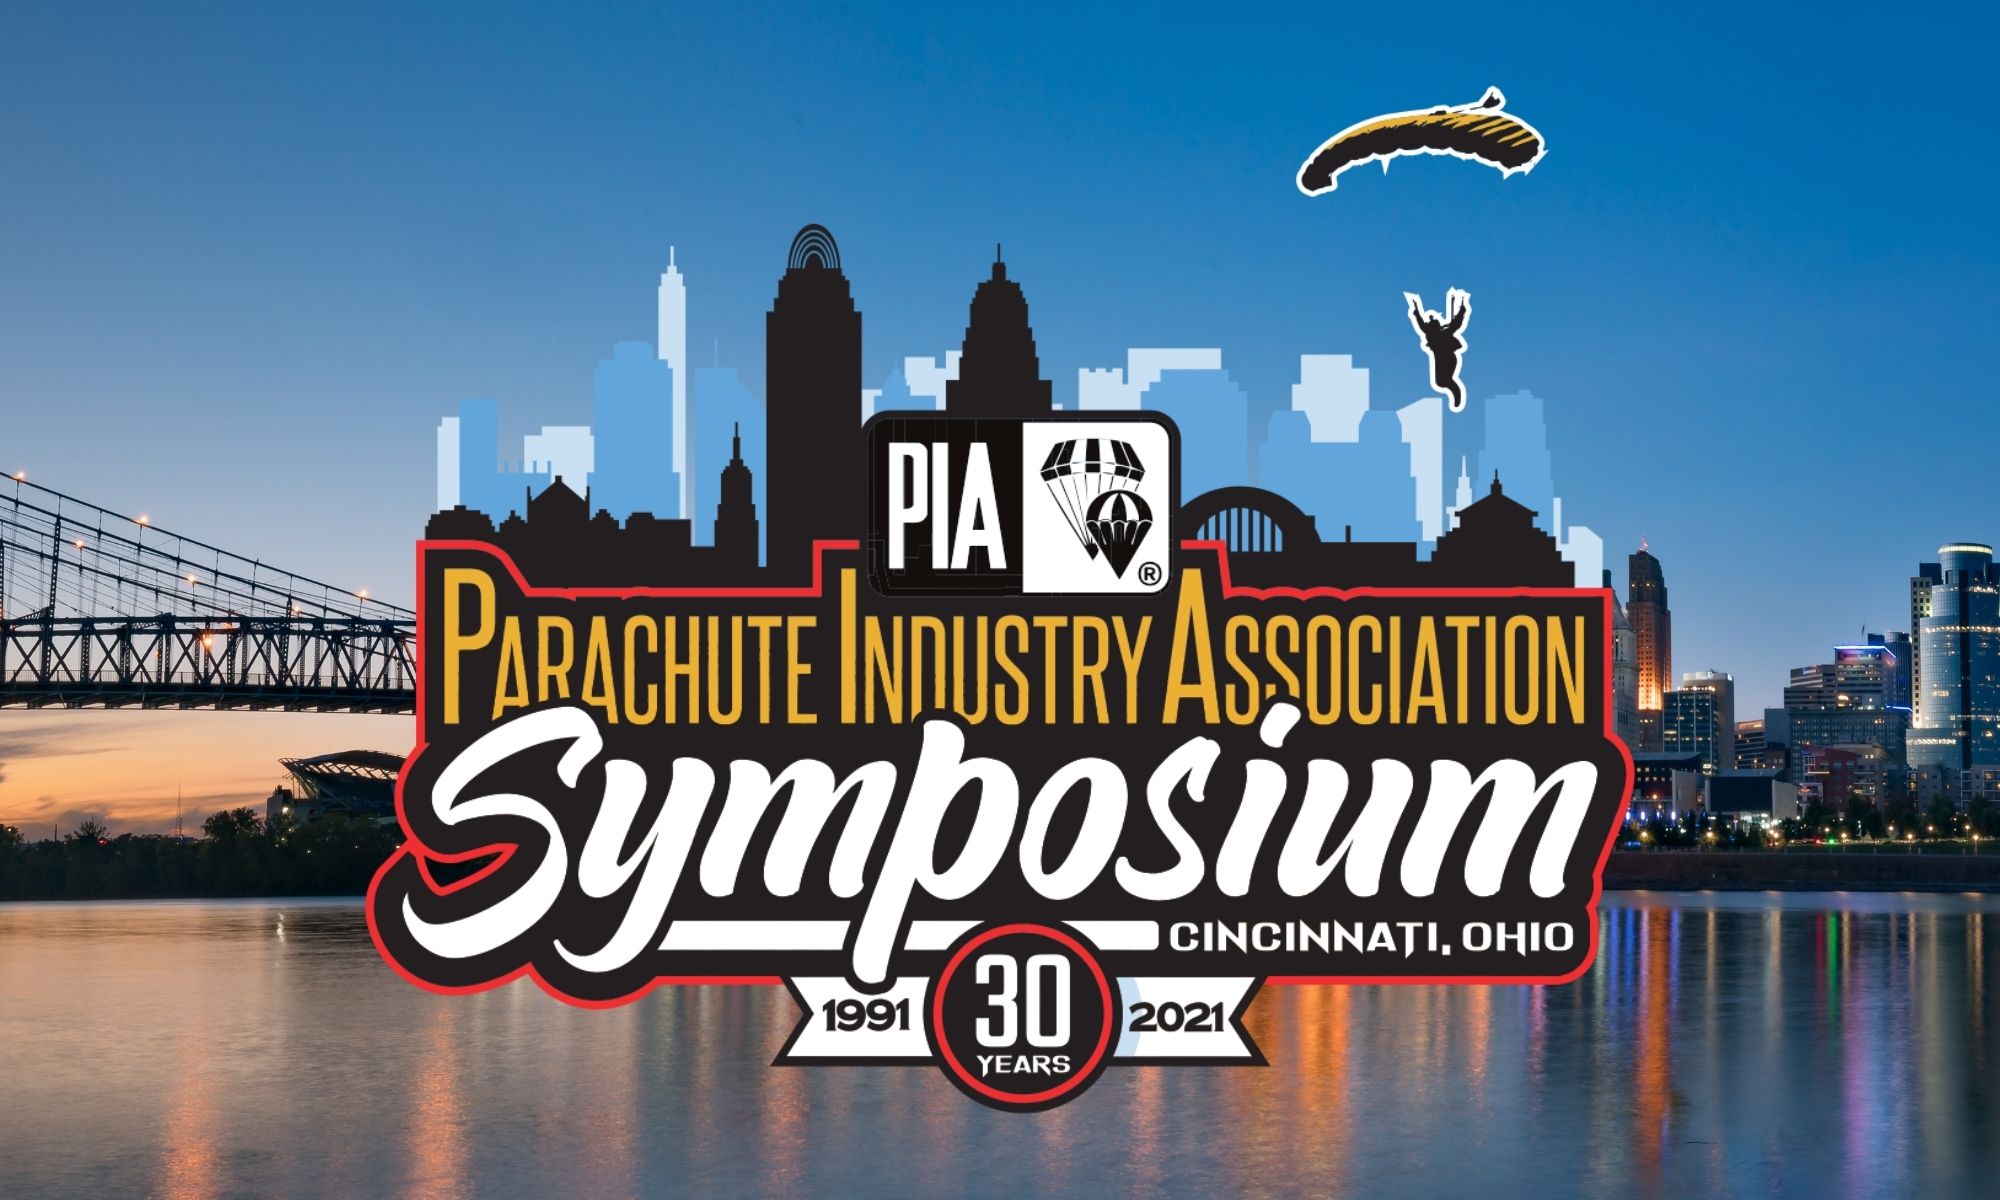 Welcome to PIA Symposium 2021 in Downtown Cincinnati